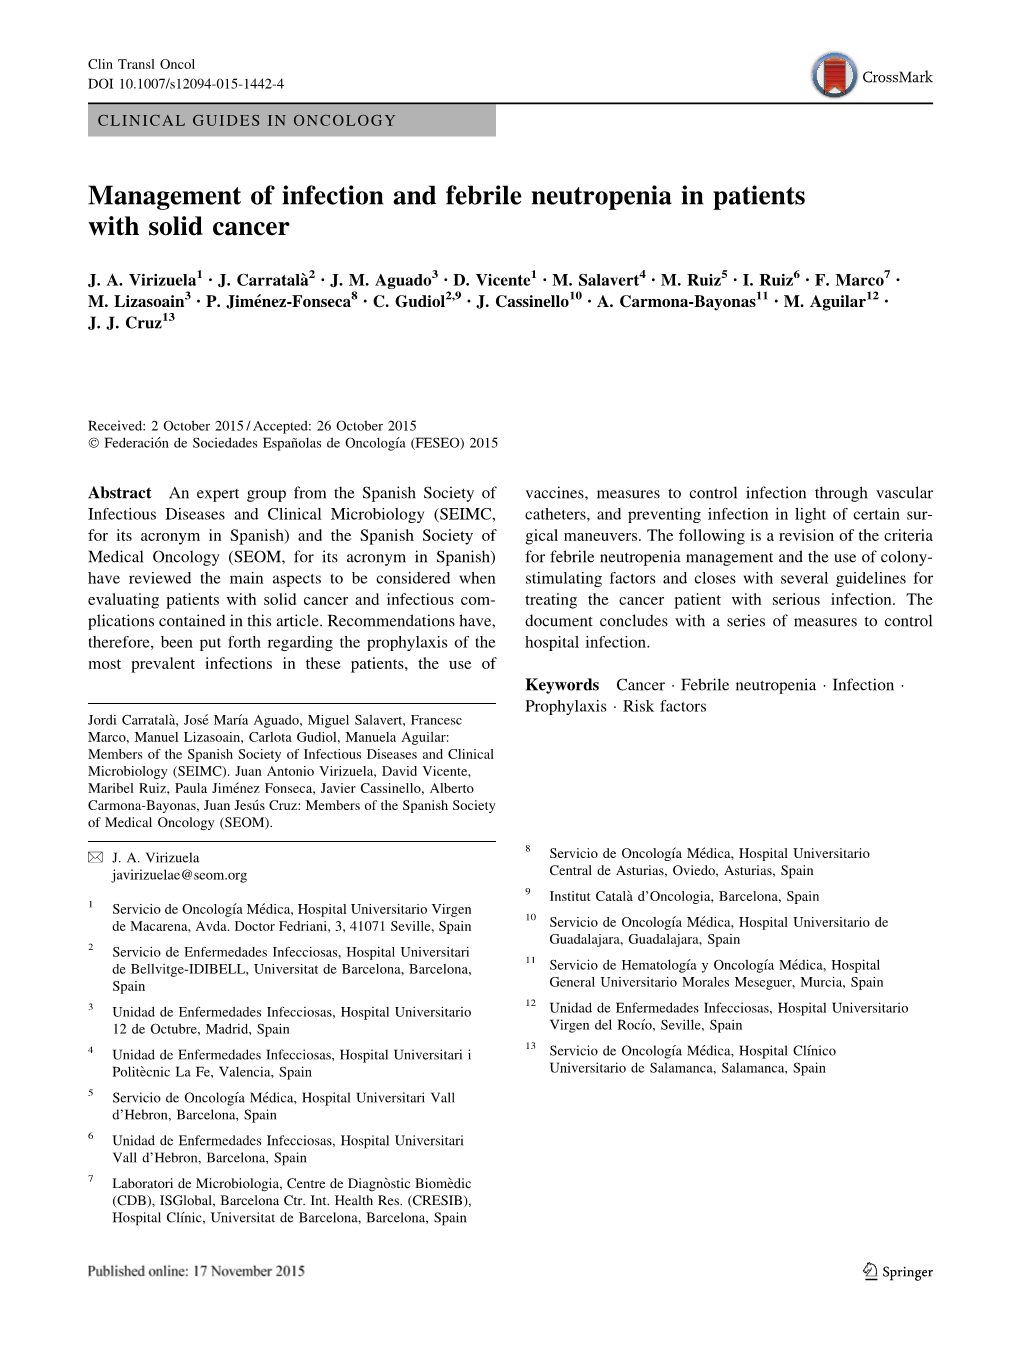 Management of Infection and Febrile Neutropenia in Patients with Solid Cancer